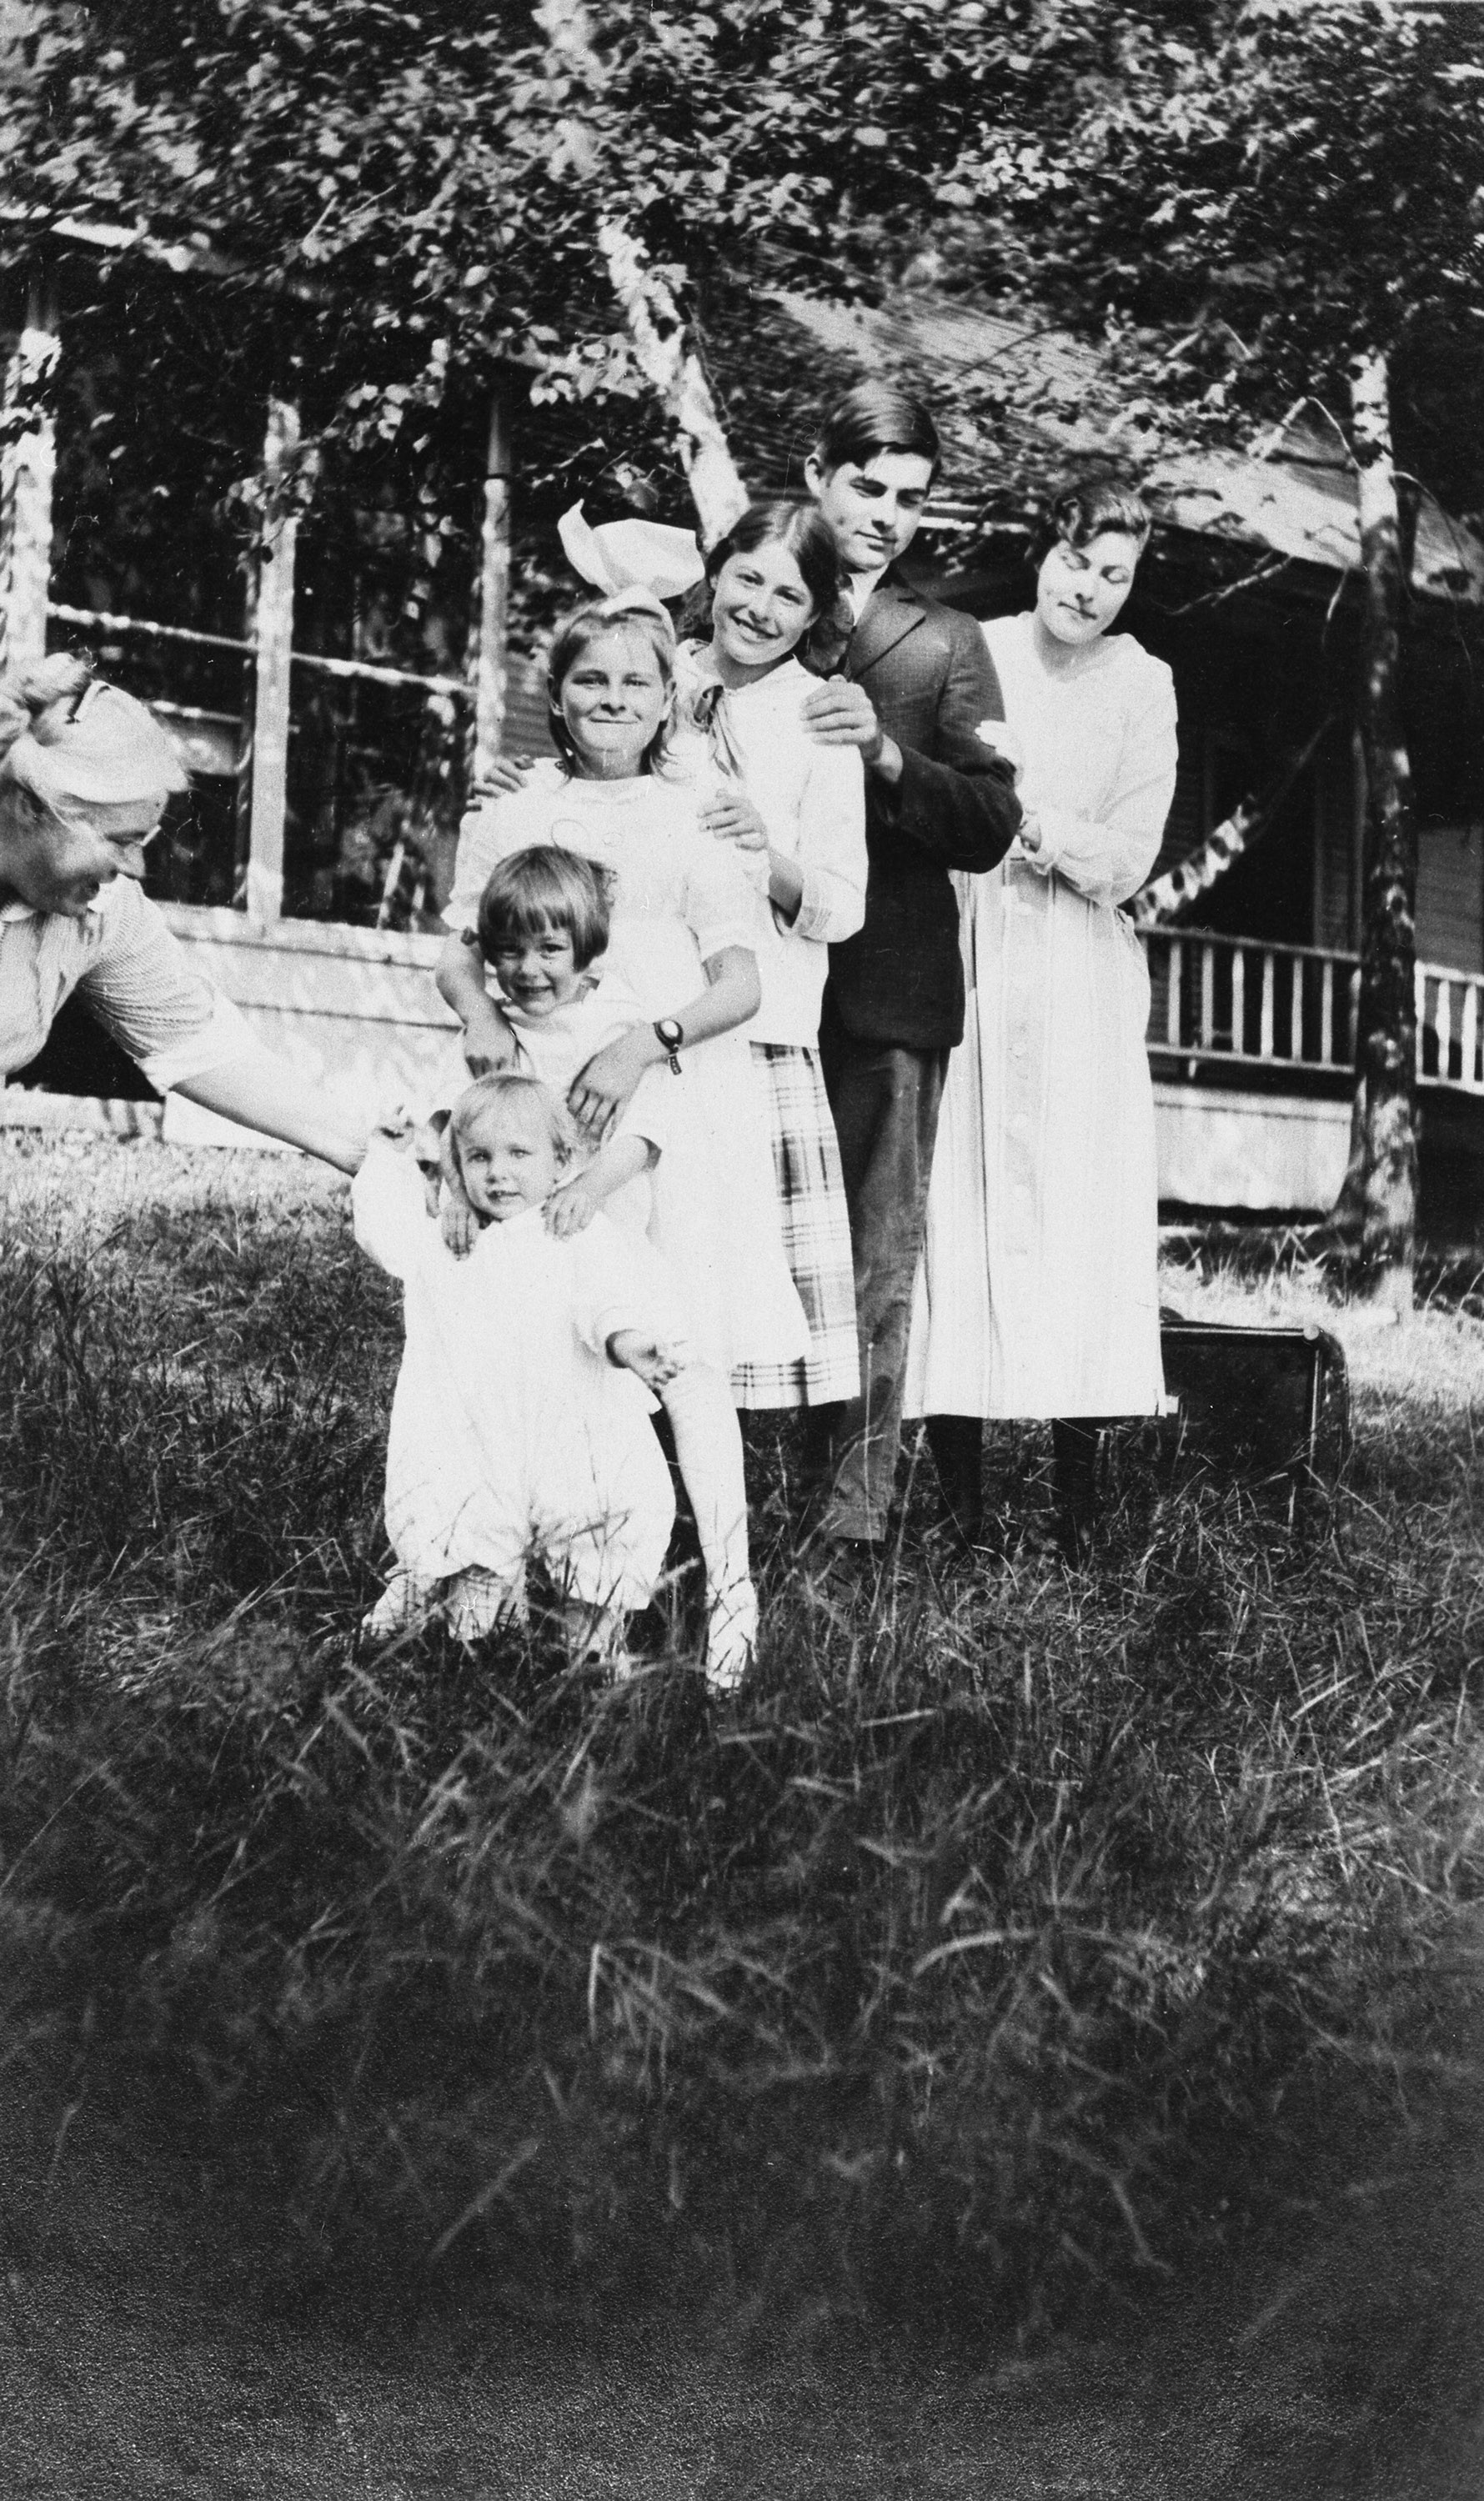 The Hemingway siblings lined up in order of age in front of the family's cottage, Windemere, on Walloon Lake, Michigan, 1916.  Their mother, Grace Hall Hemingway, helps steady the baby, Leicester, standing in front of his older siblings.